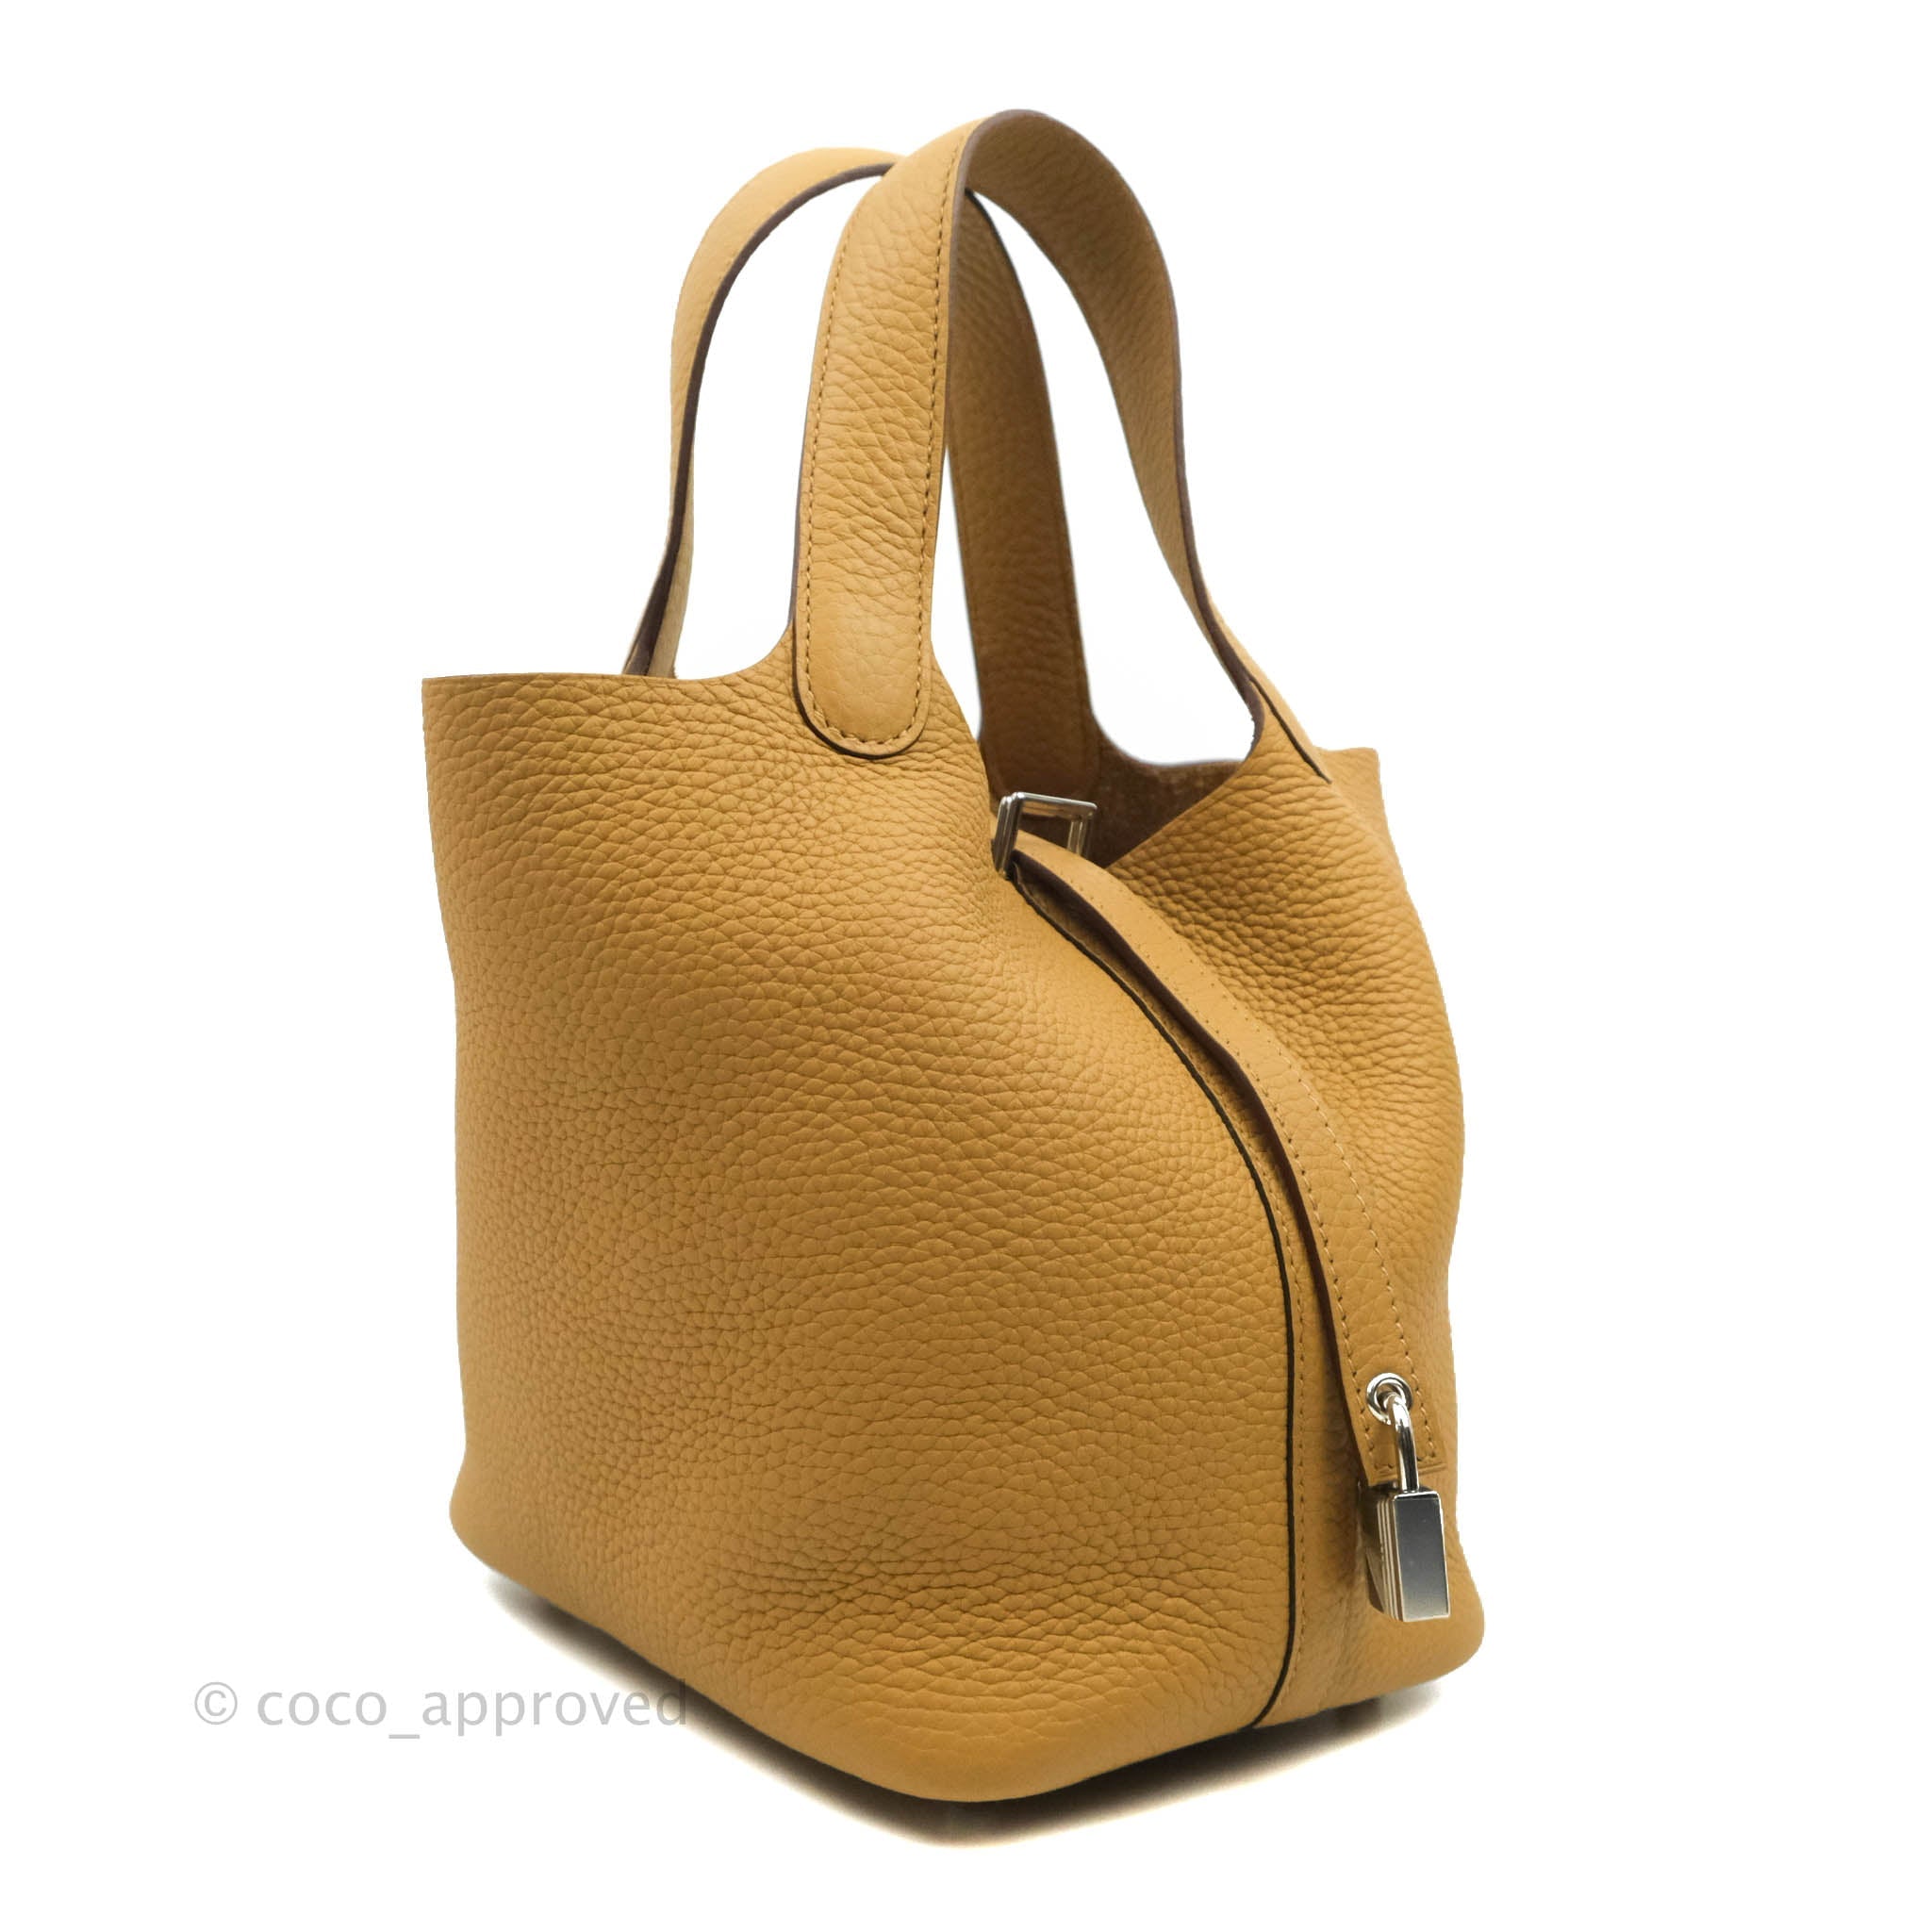 Hermes Picotin 18 in Biscuit Clemence Leather and GHW